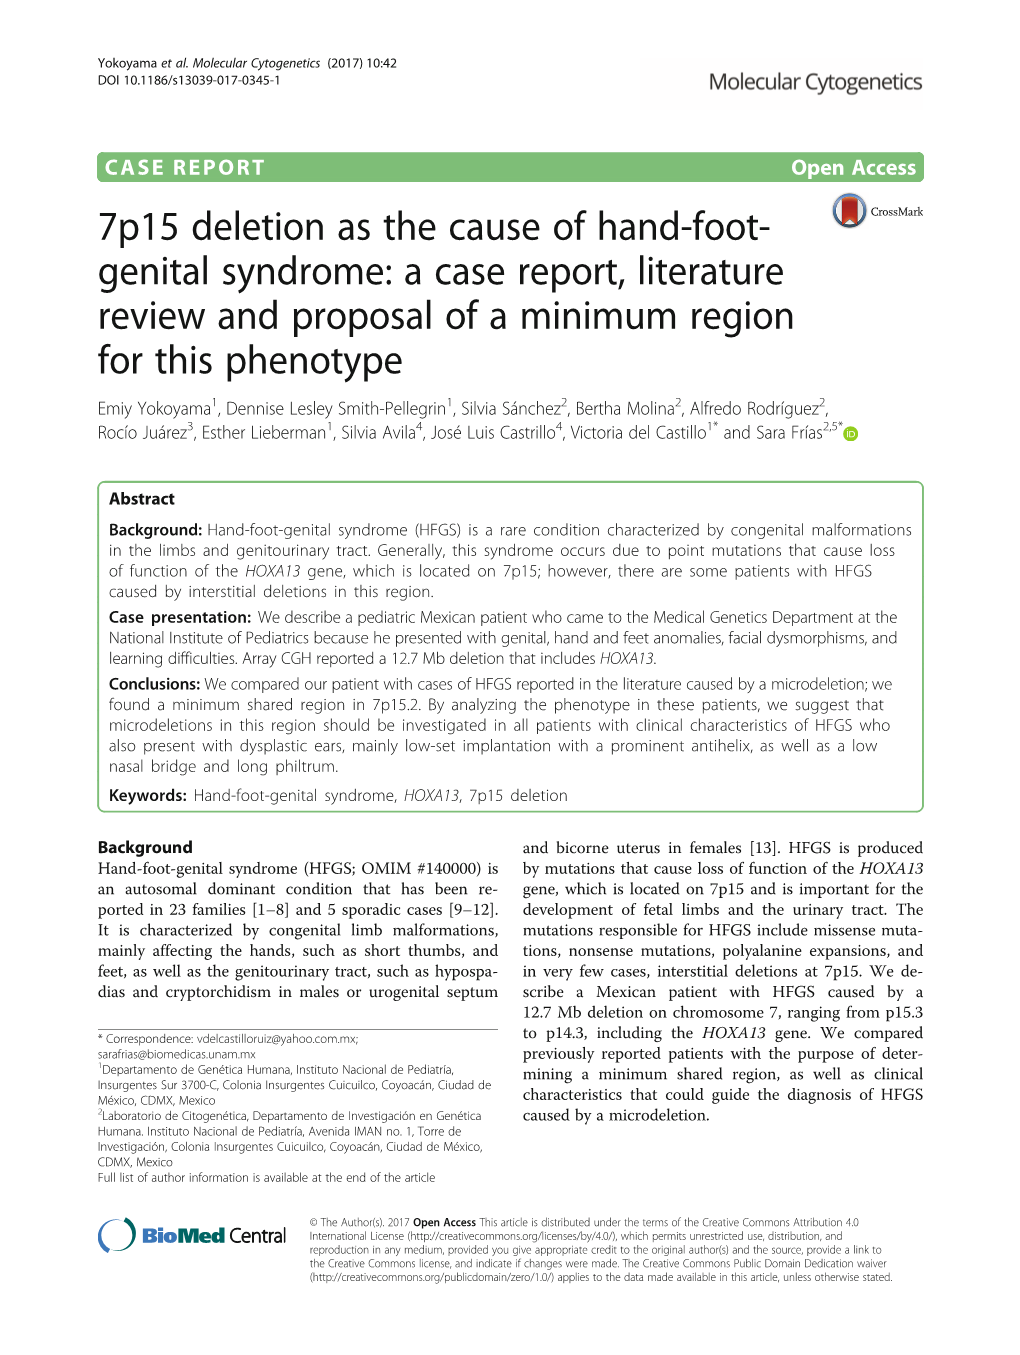 7P15 Deletion As the Cause of Hand-Foot